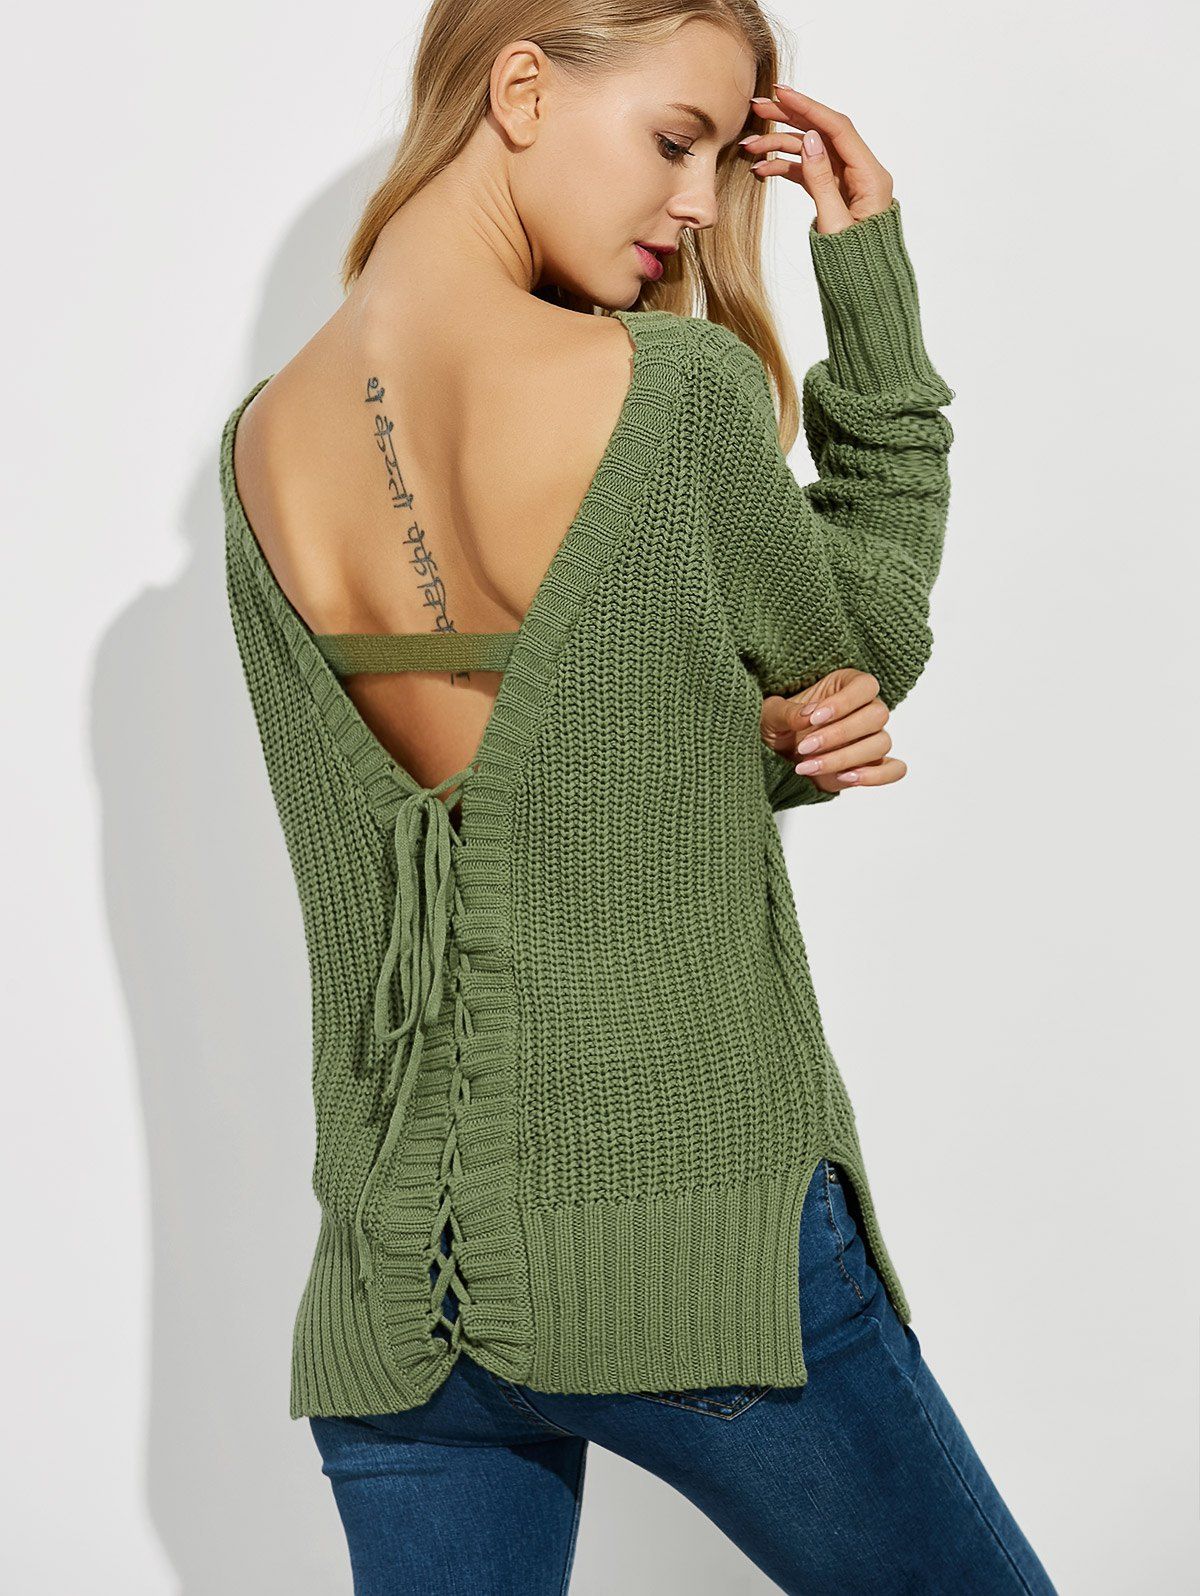 Backless Lace Up Ribbed Sweater - GREEN 2XL